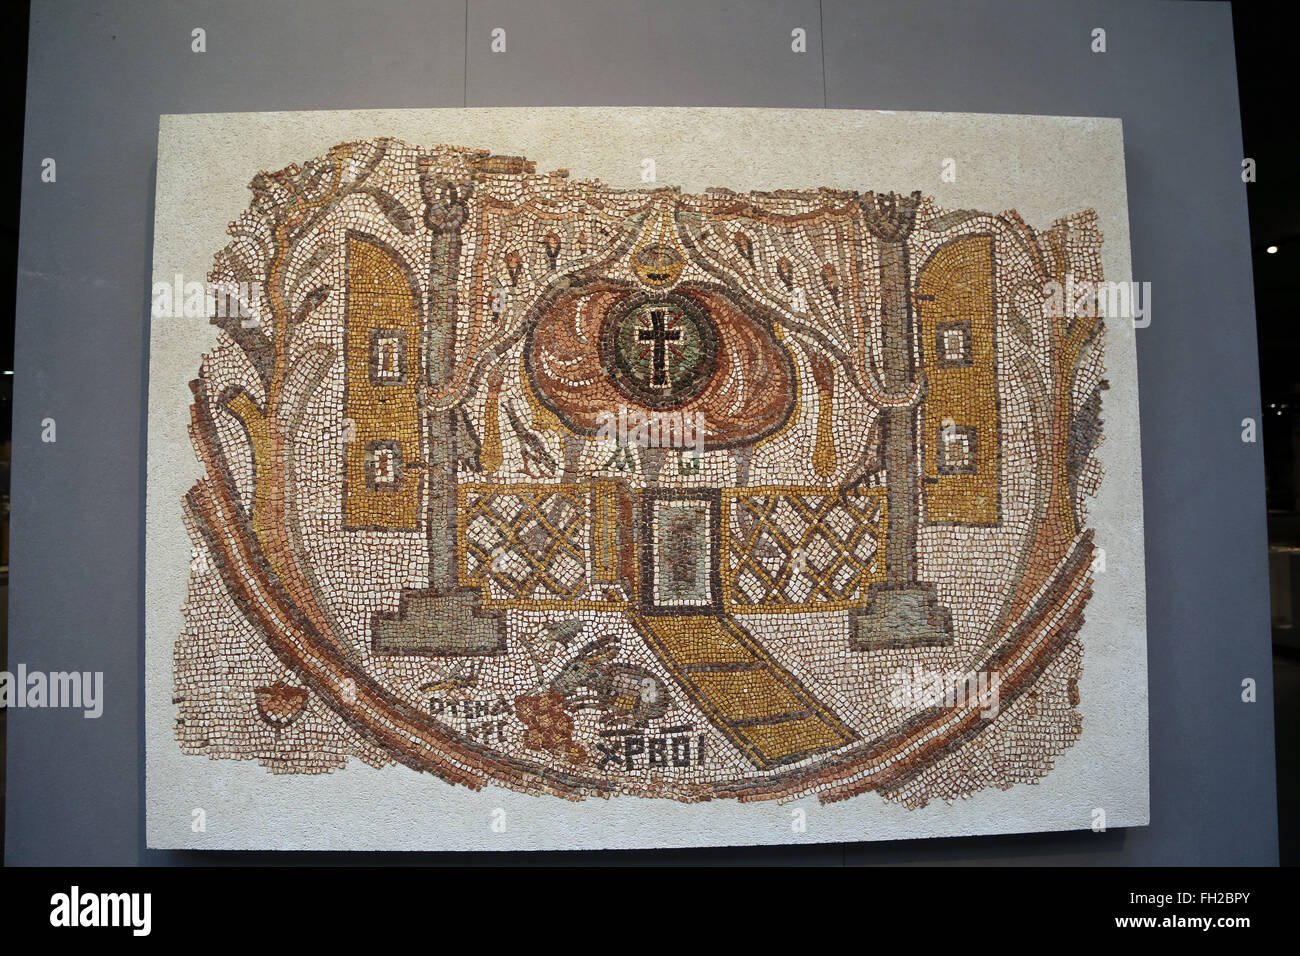 Roman mosaic of the inside of a church. Eastern Mediterranean, 5th century AD. Louvre Museum. Paris. France. Stock Photo